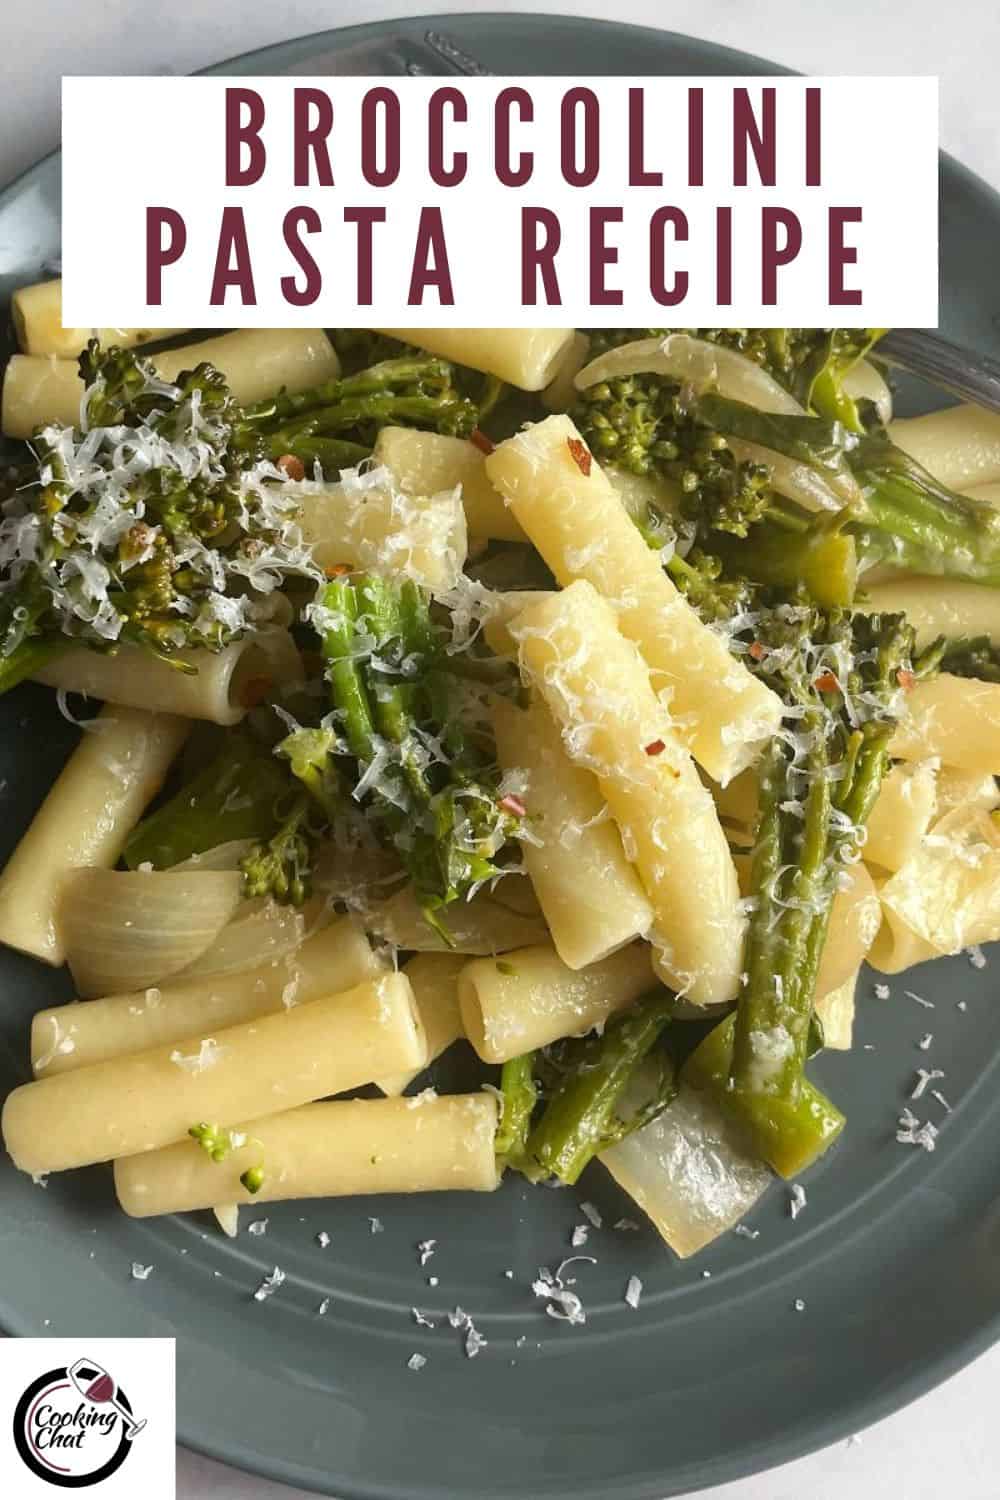 broccolini tossed with ziti pasta, with a text box that says "Broccolini Pasta Recipe".